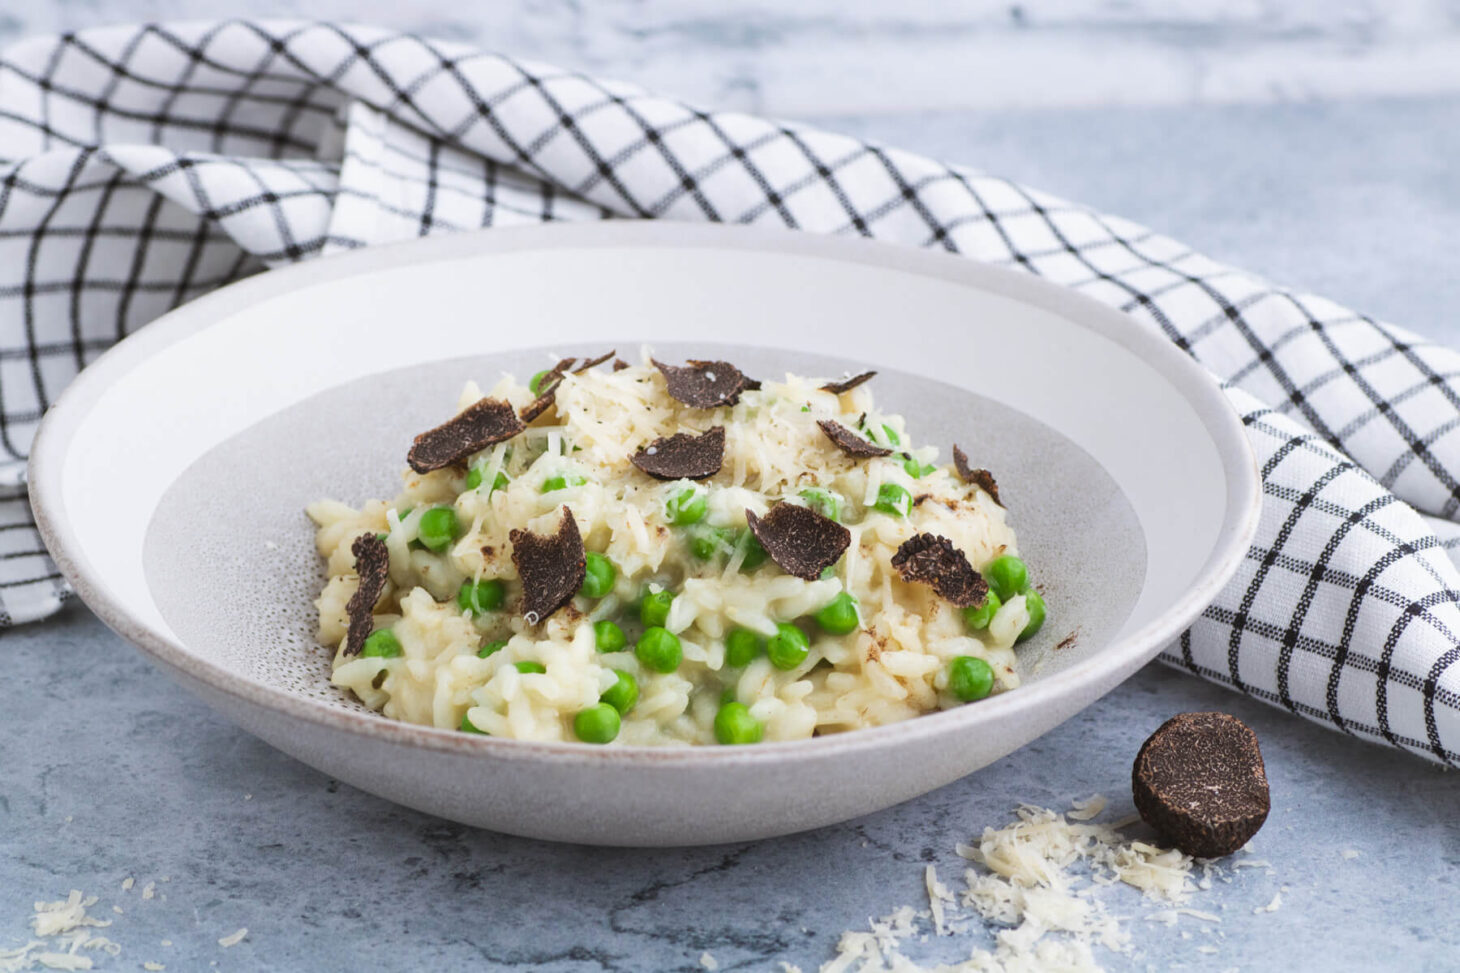 A stone bowl containing creamy truffle risotto studded with green peas and sliced winter truffle.